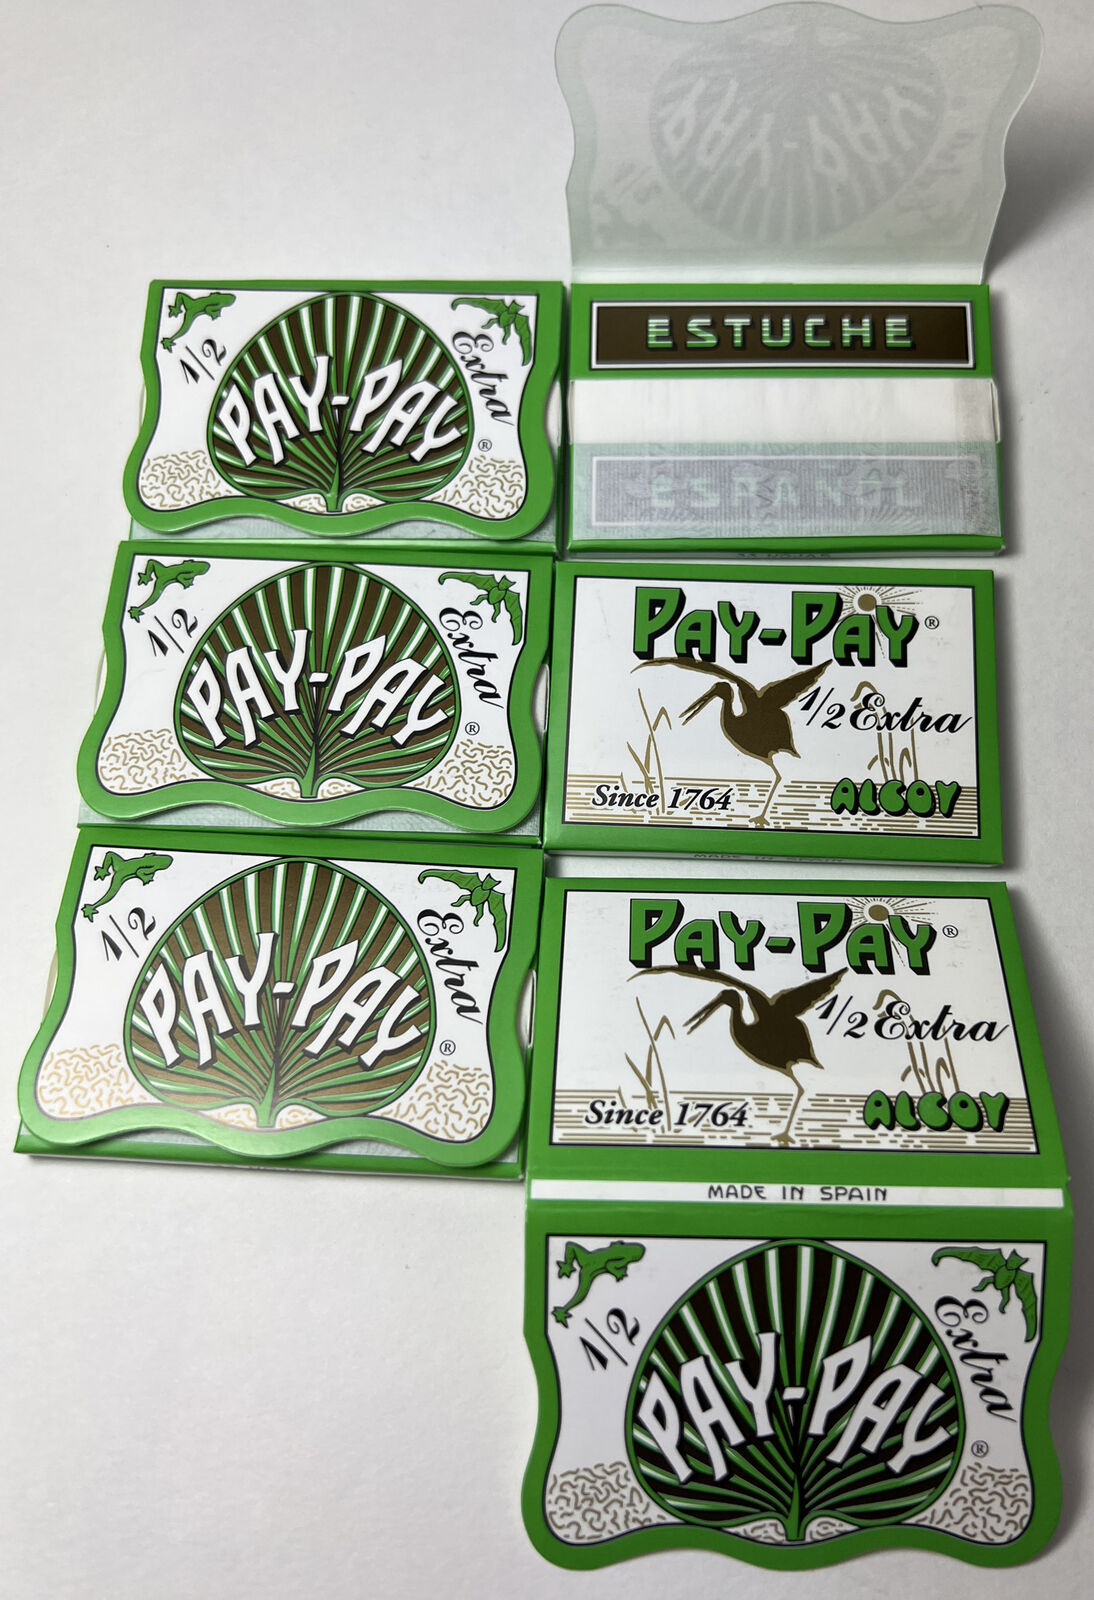 Pay Pay 1/2  extra natural gum cigarette rolling papers made in Spain 6 pack￼